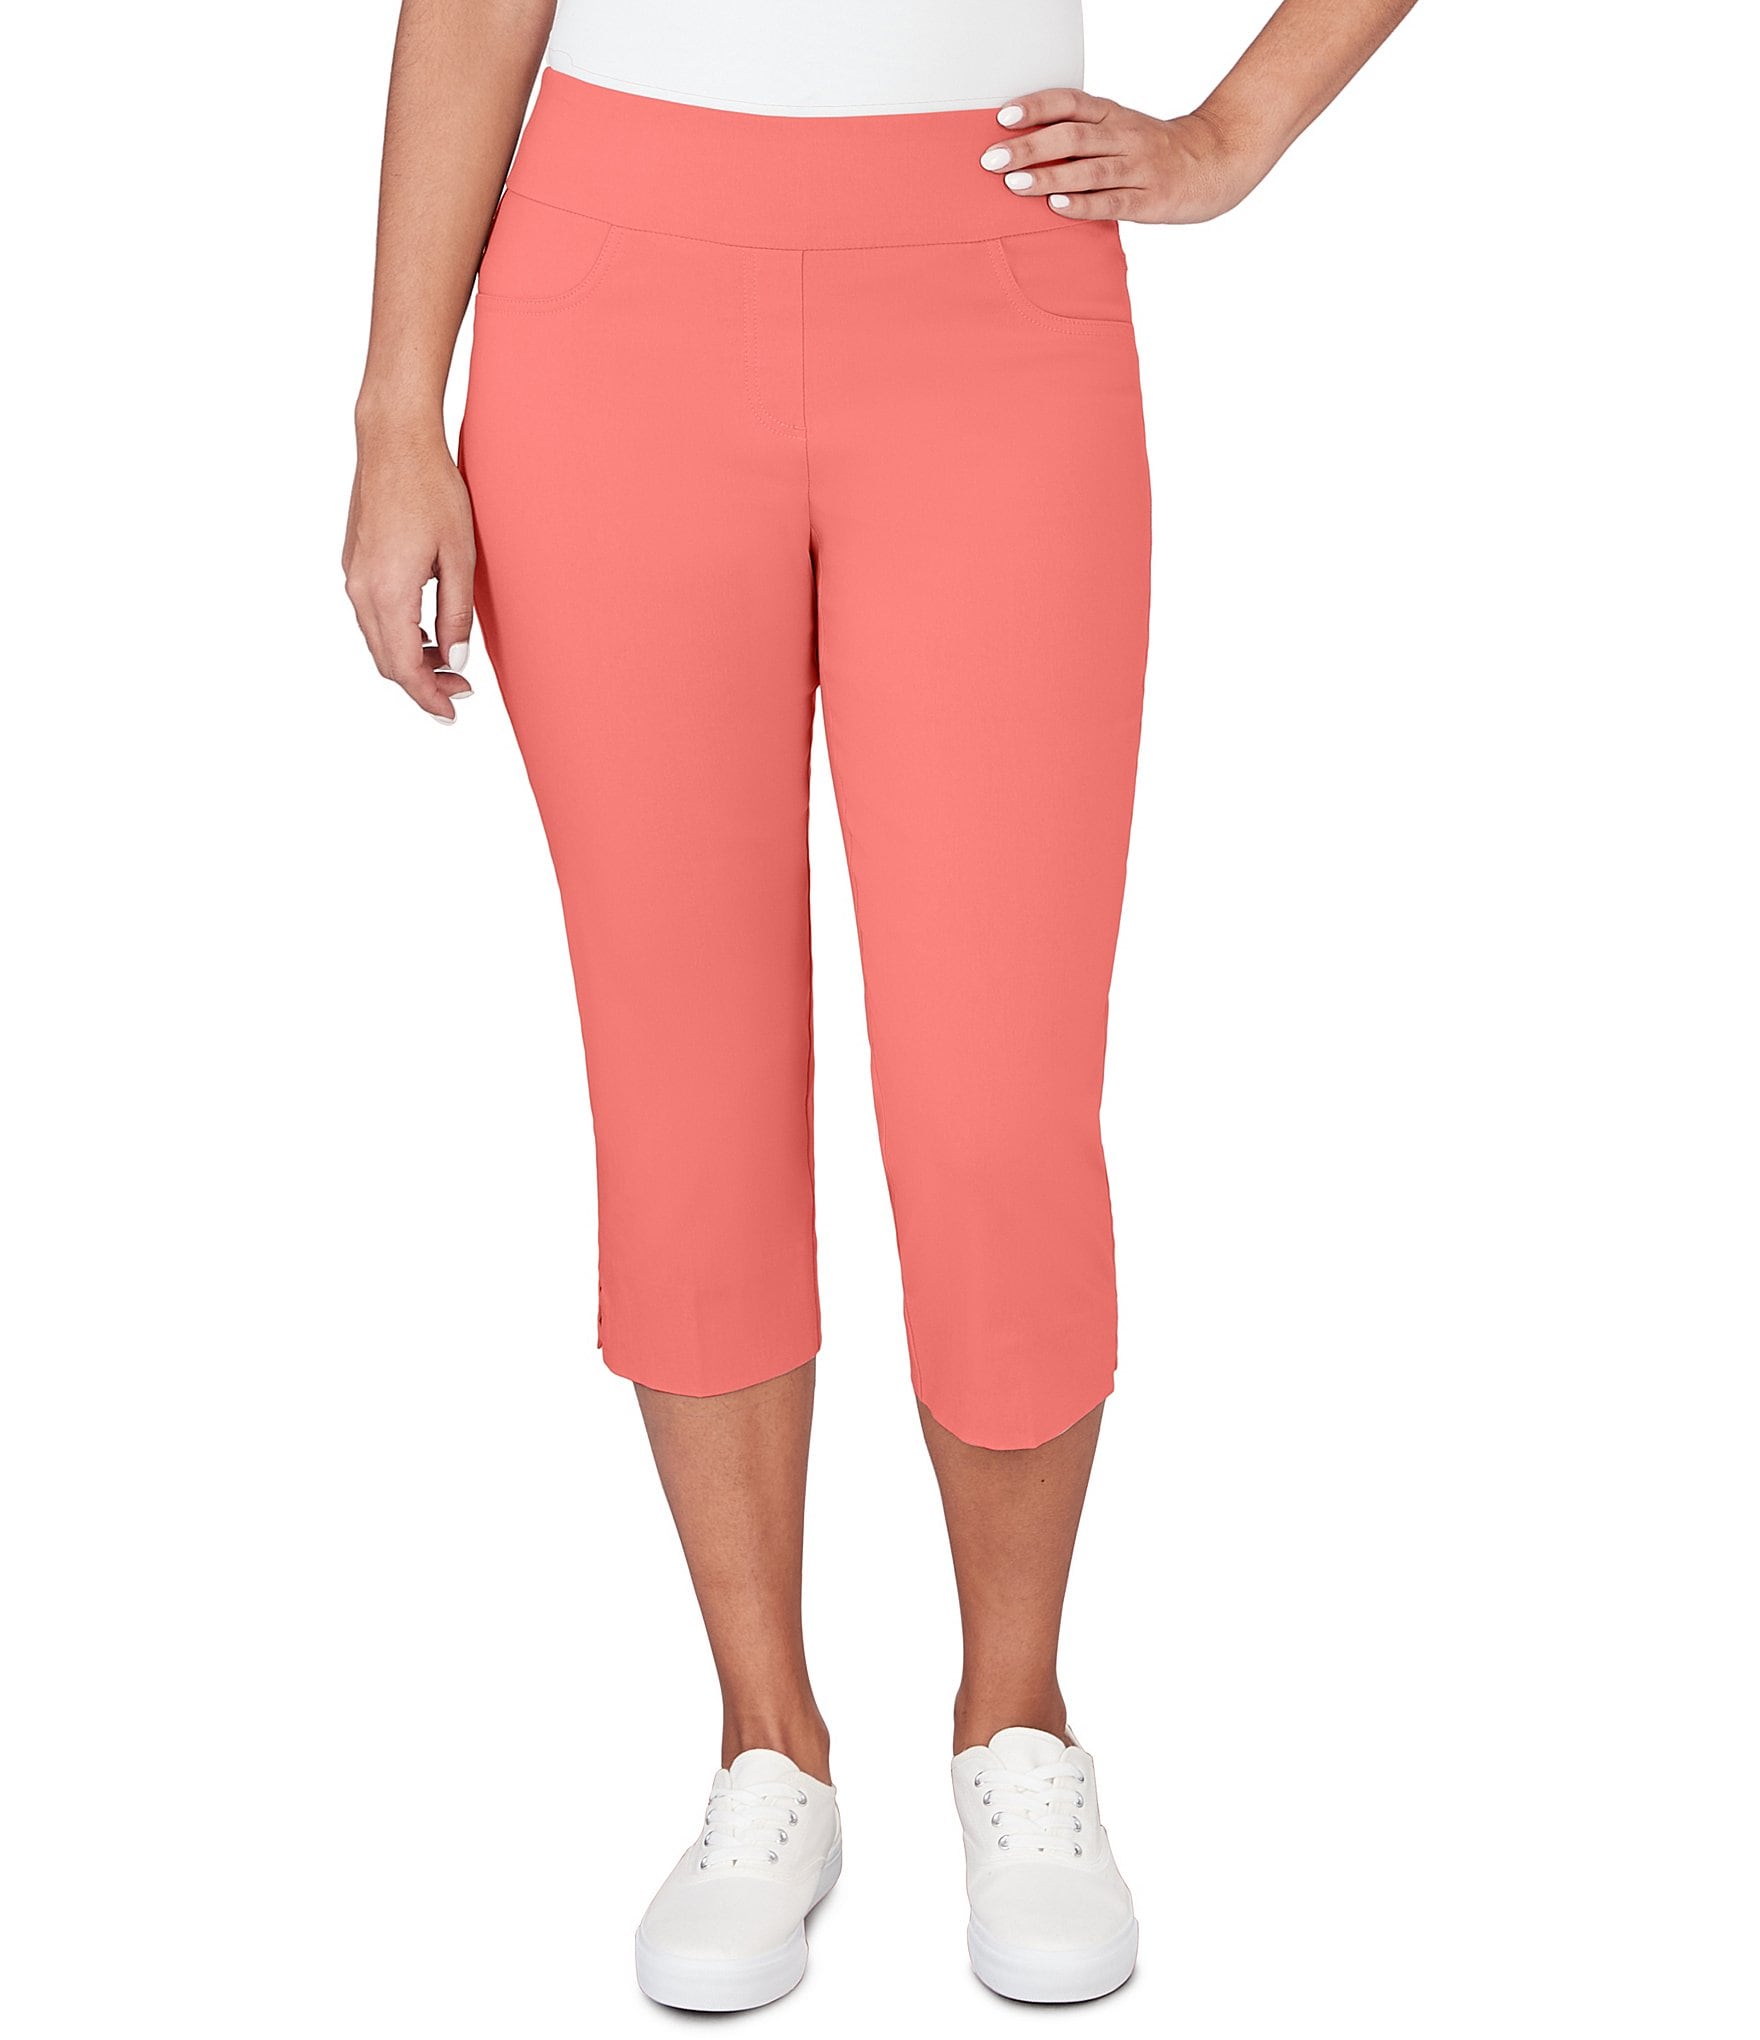 Allison Daley Tech Stretch Pull-On Skimmer Pants